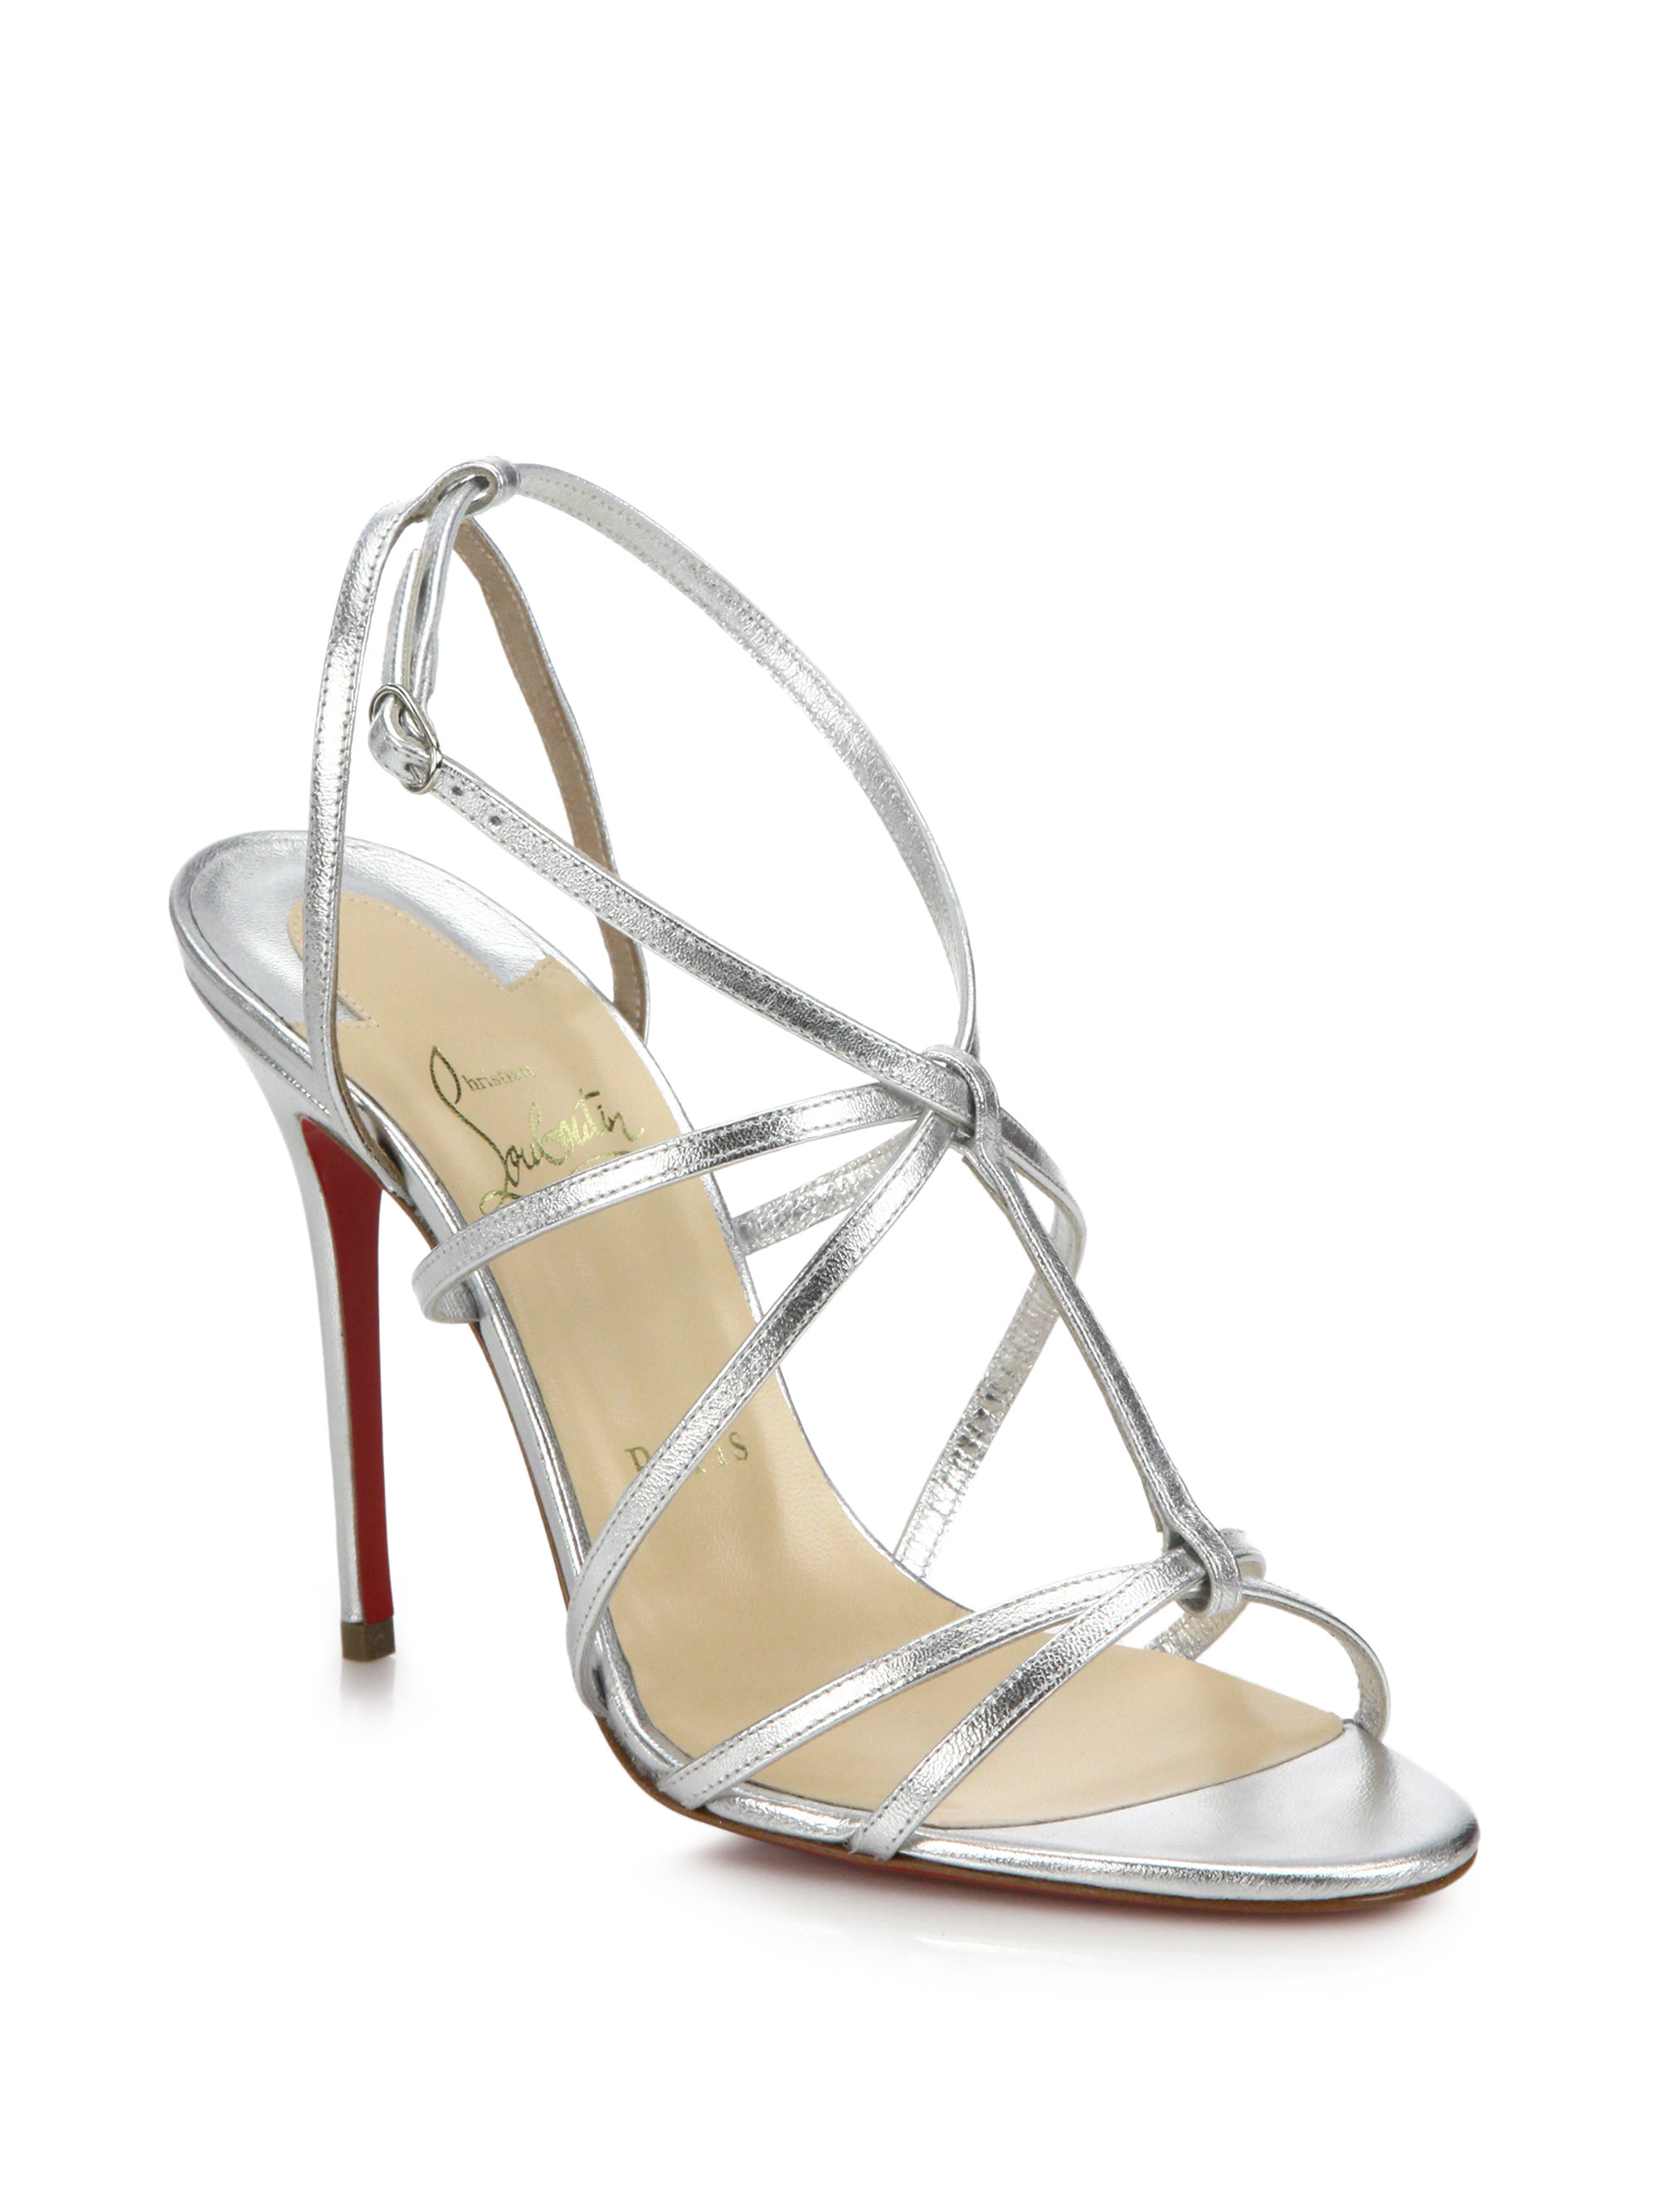 Christian louboutin Youpiyou Metallic Cage Sandals in Silver | Lyst  